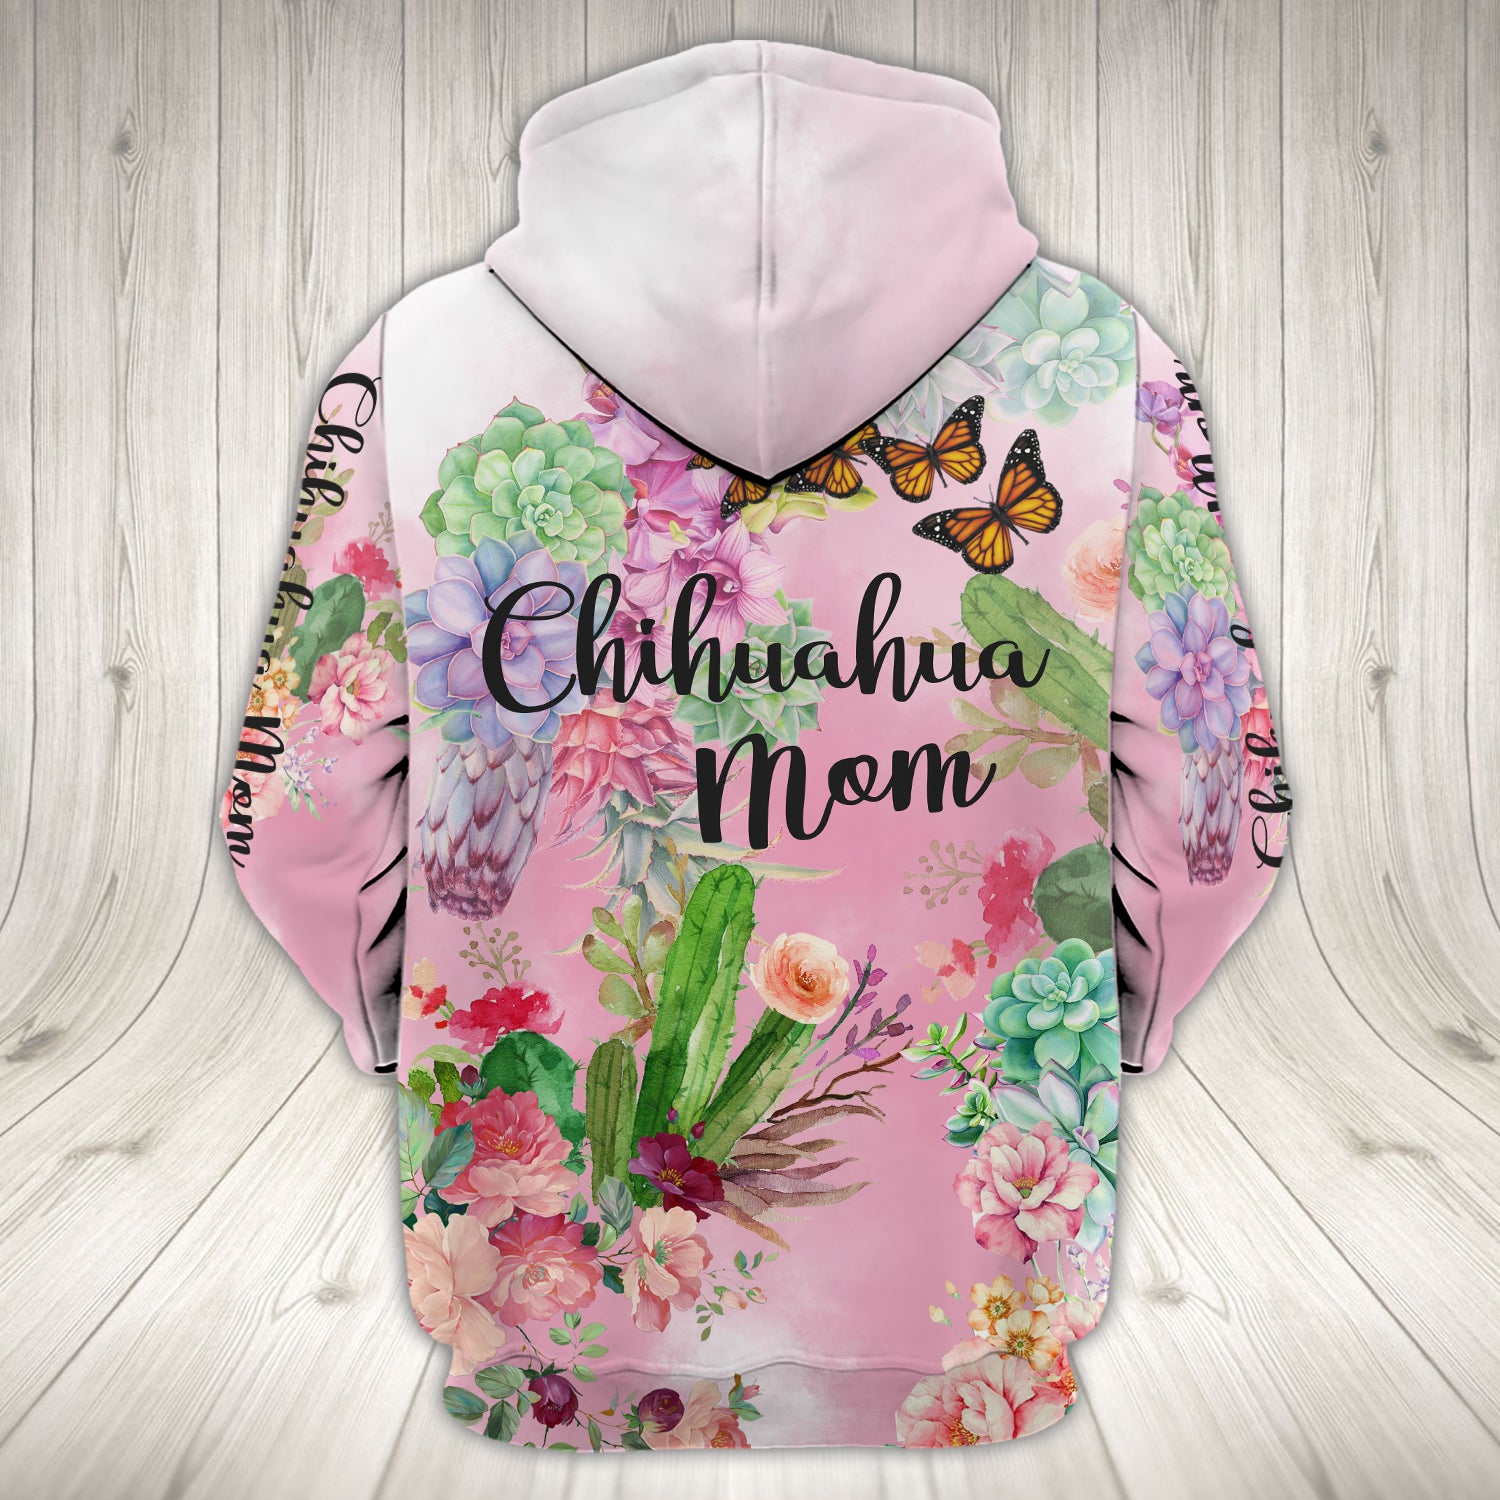 Chihuahua Lover - Personalized Name 3D Hoodie - QB95